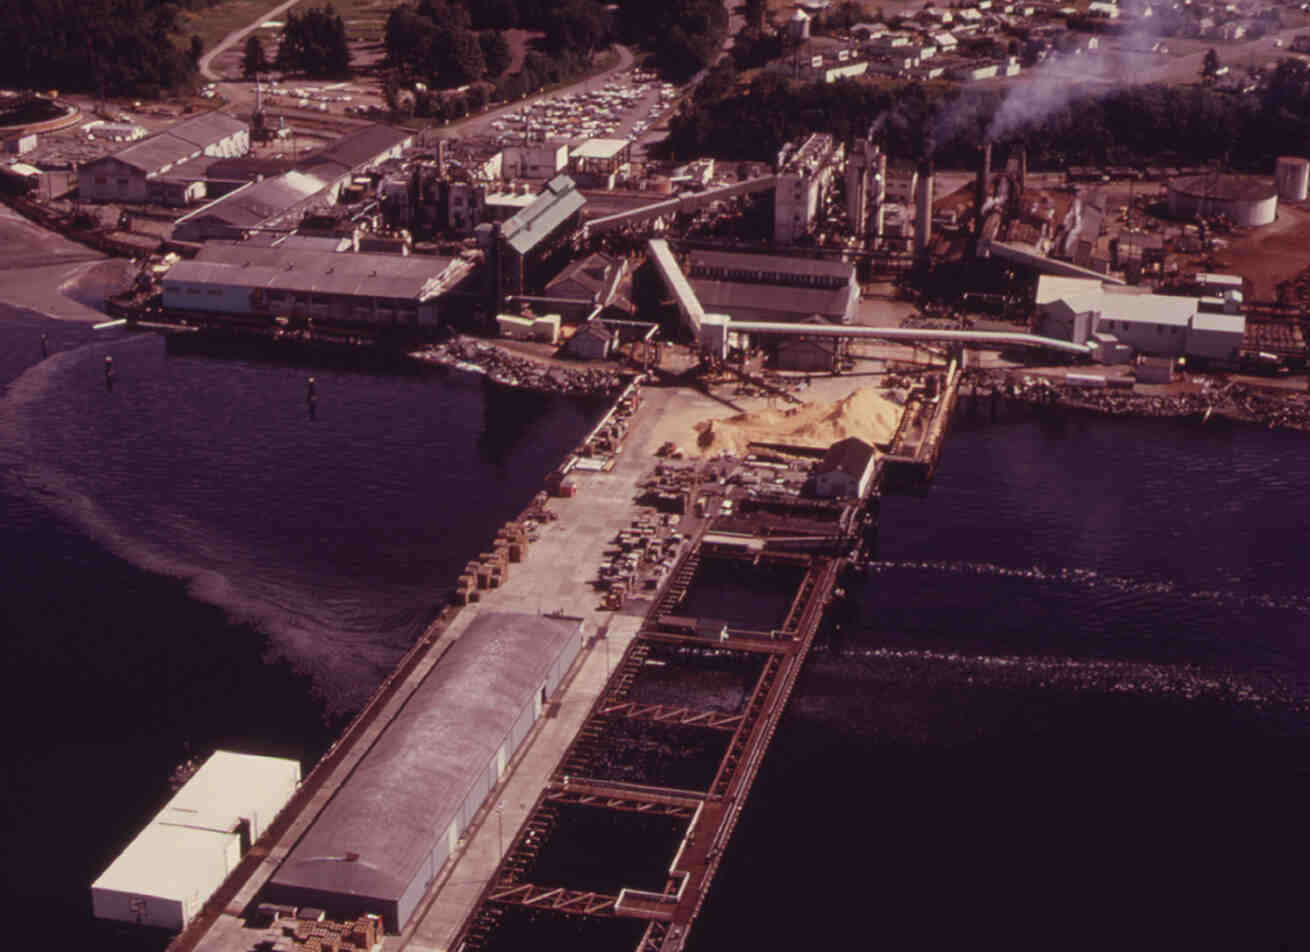 An aerial view of the Rayonier Paper Mill will pollutants coloring the water.